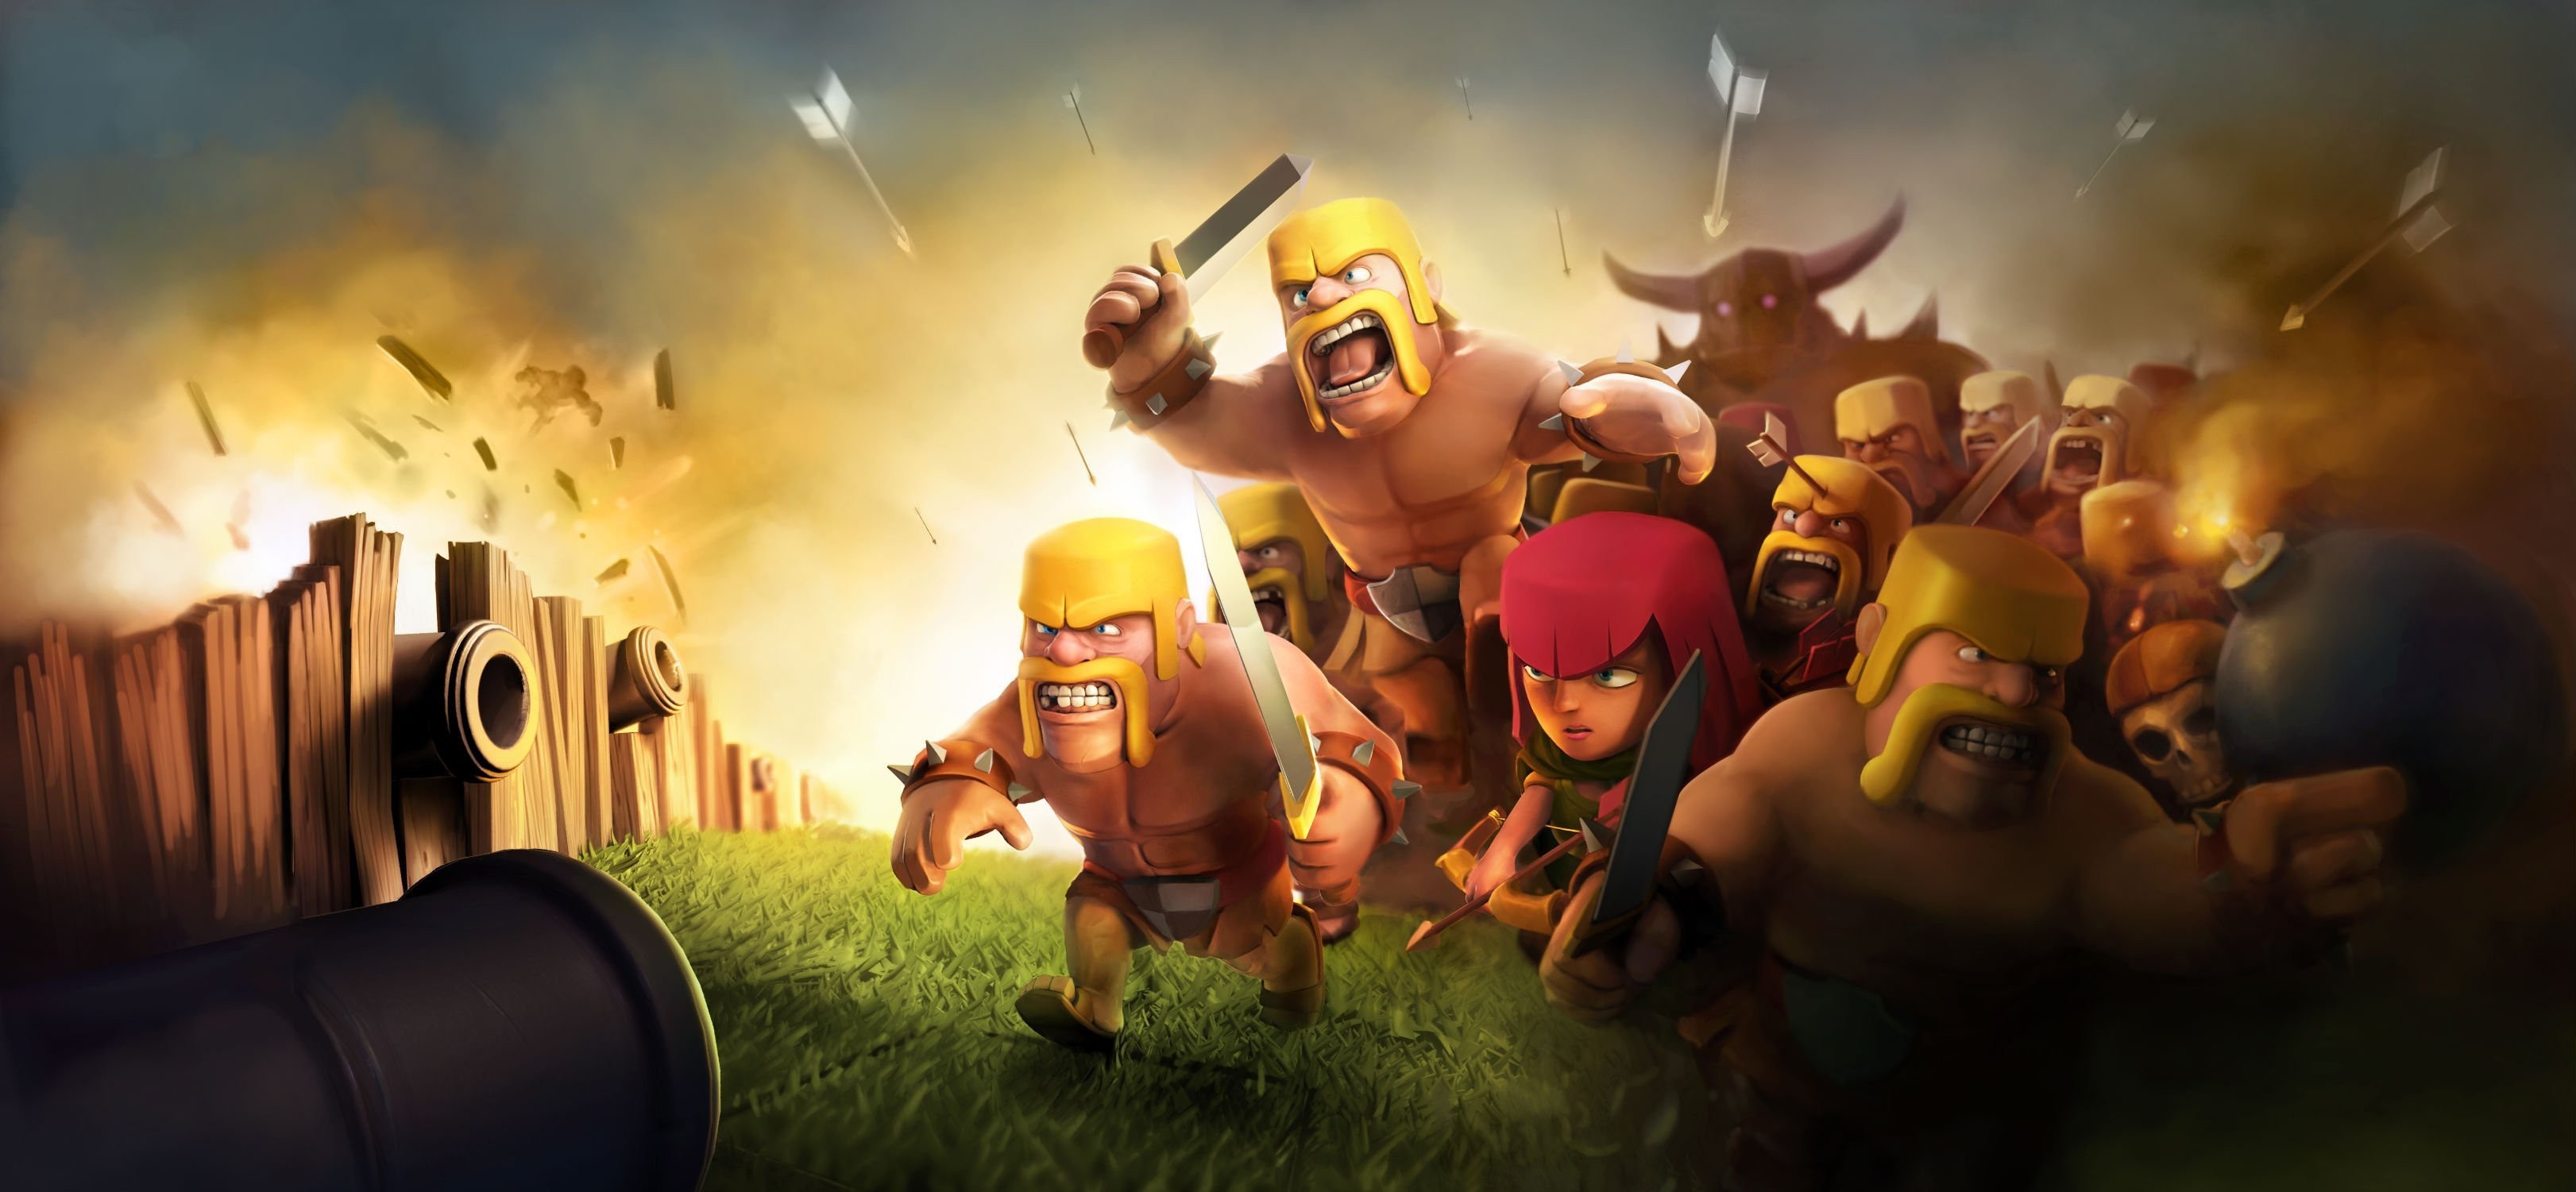 Video Game Clash Of Clans 3243x1501